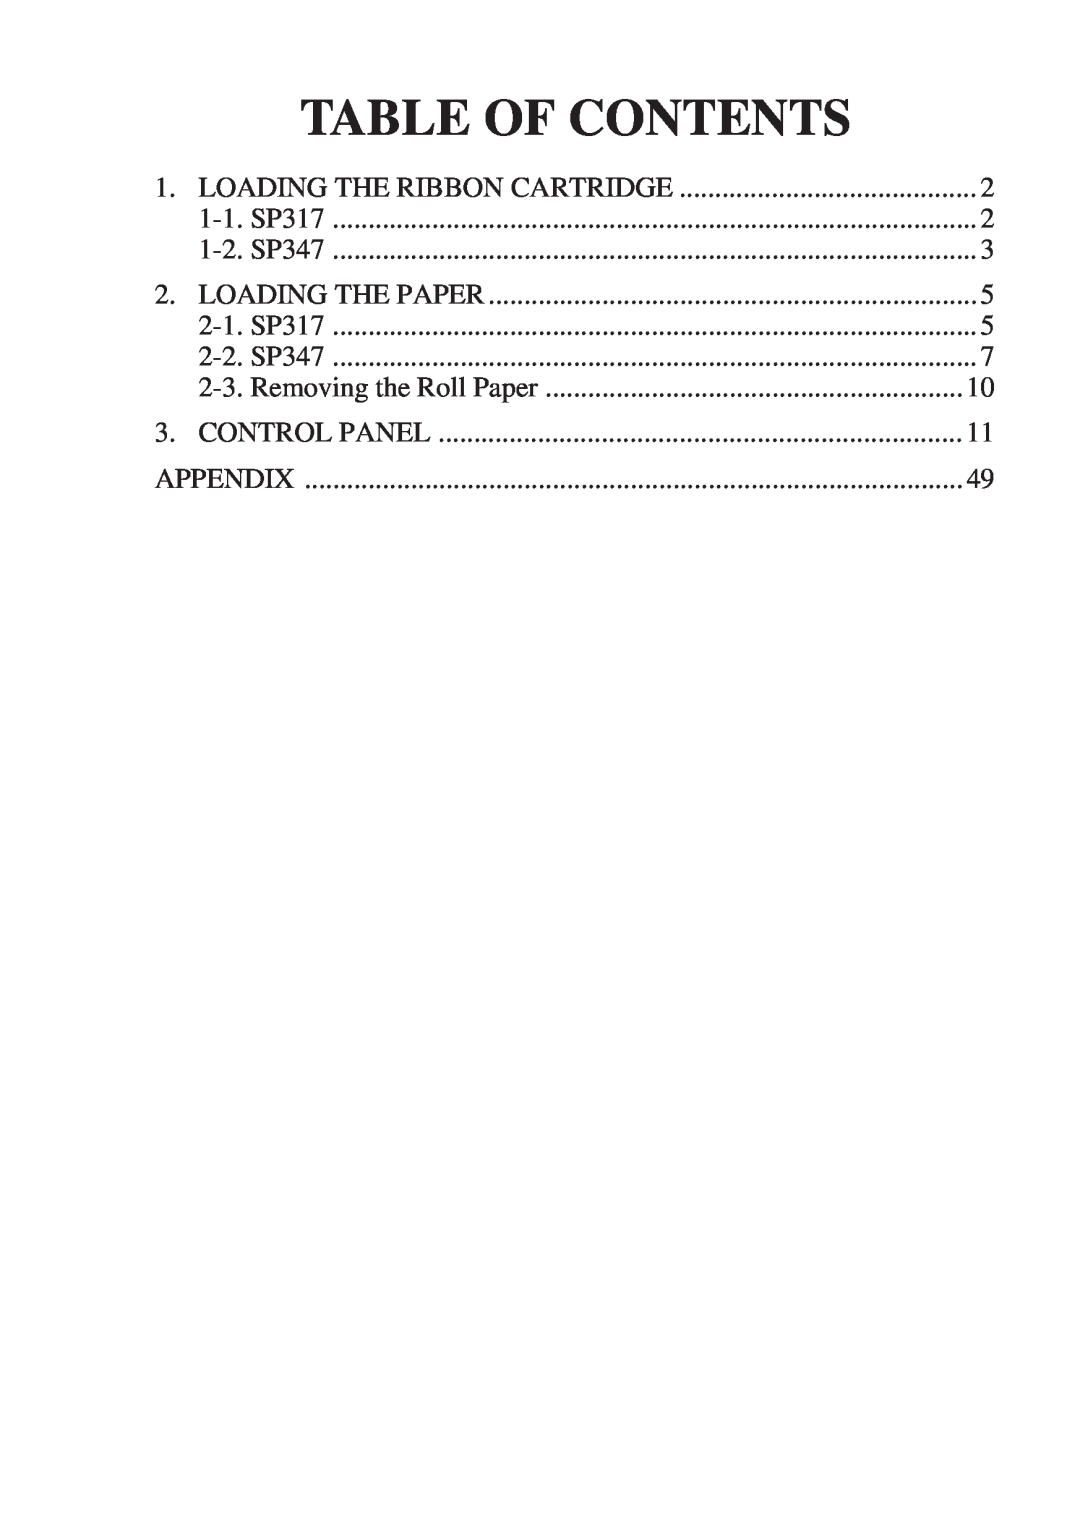 Star Micronics 347F Table Of Contents, 1-1. SP317, SP347, Loading The Paper, Removing the Roll Paper, Control Panel 